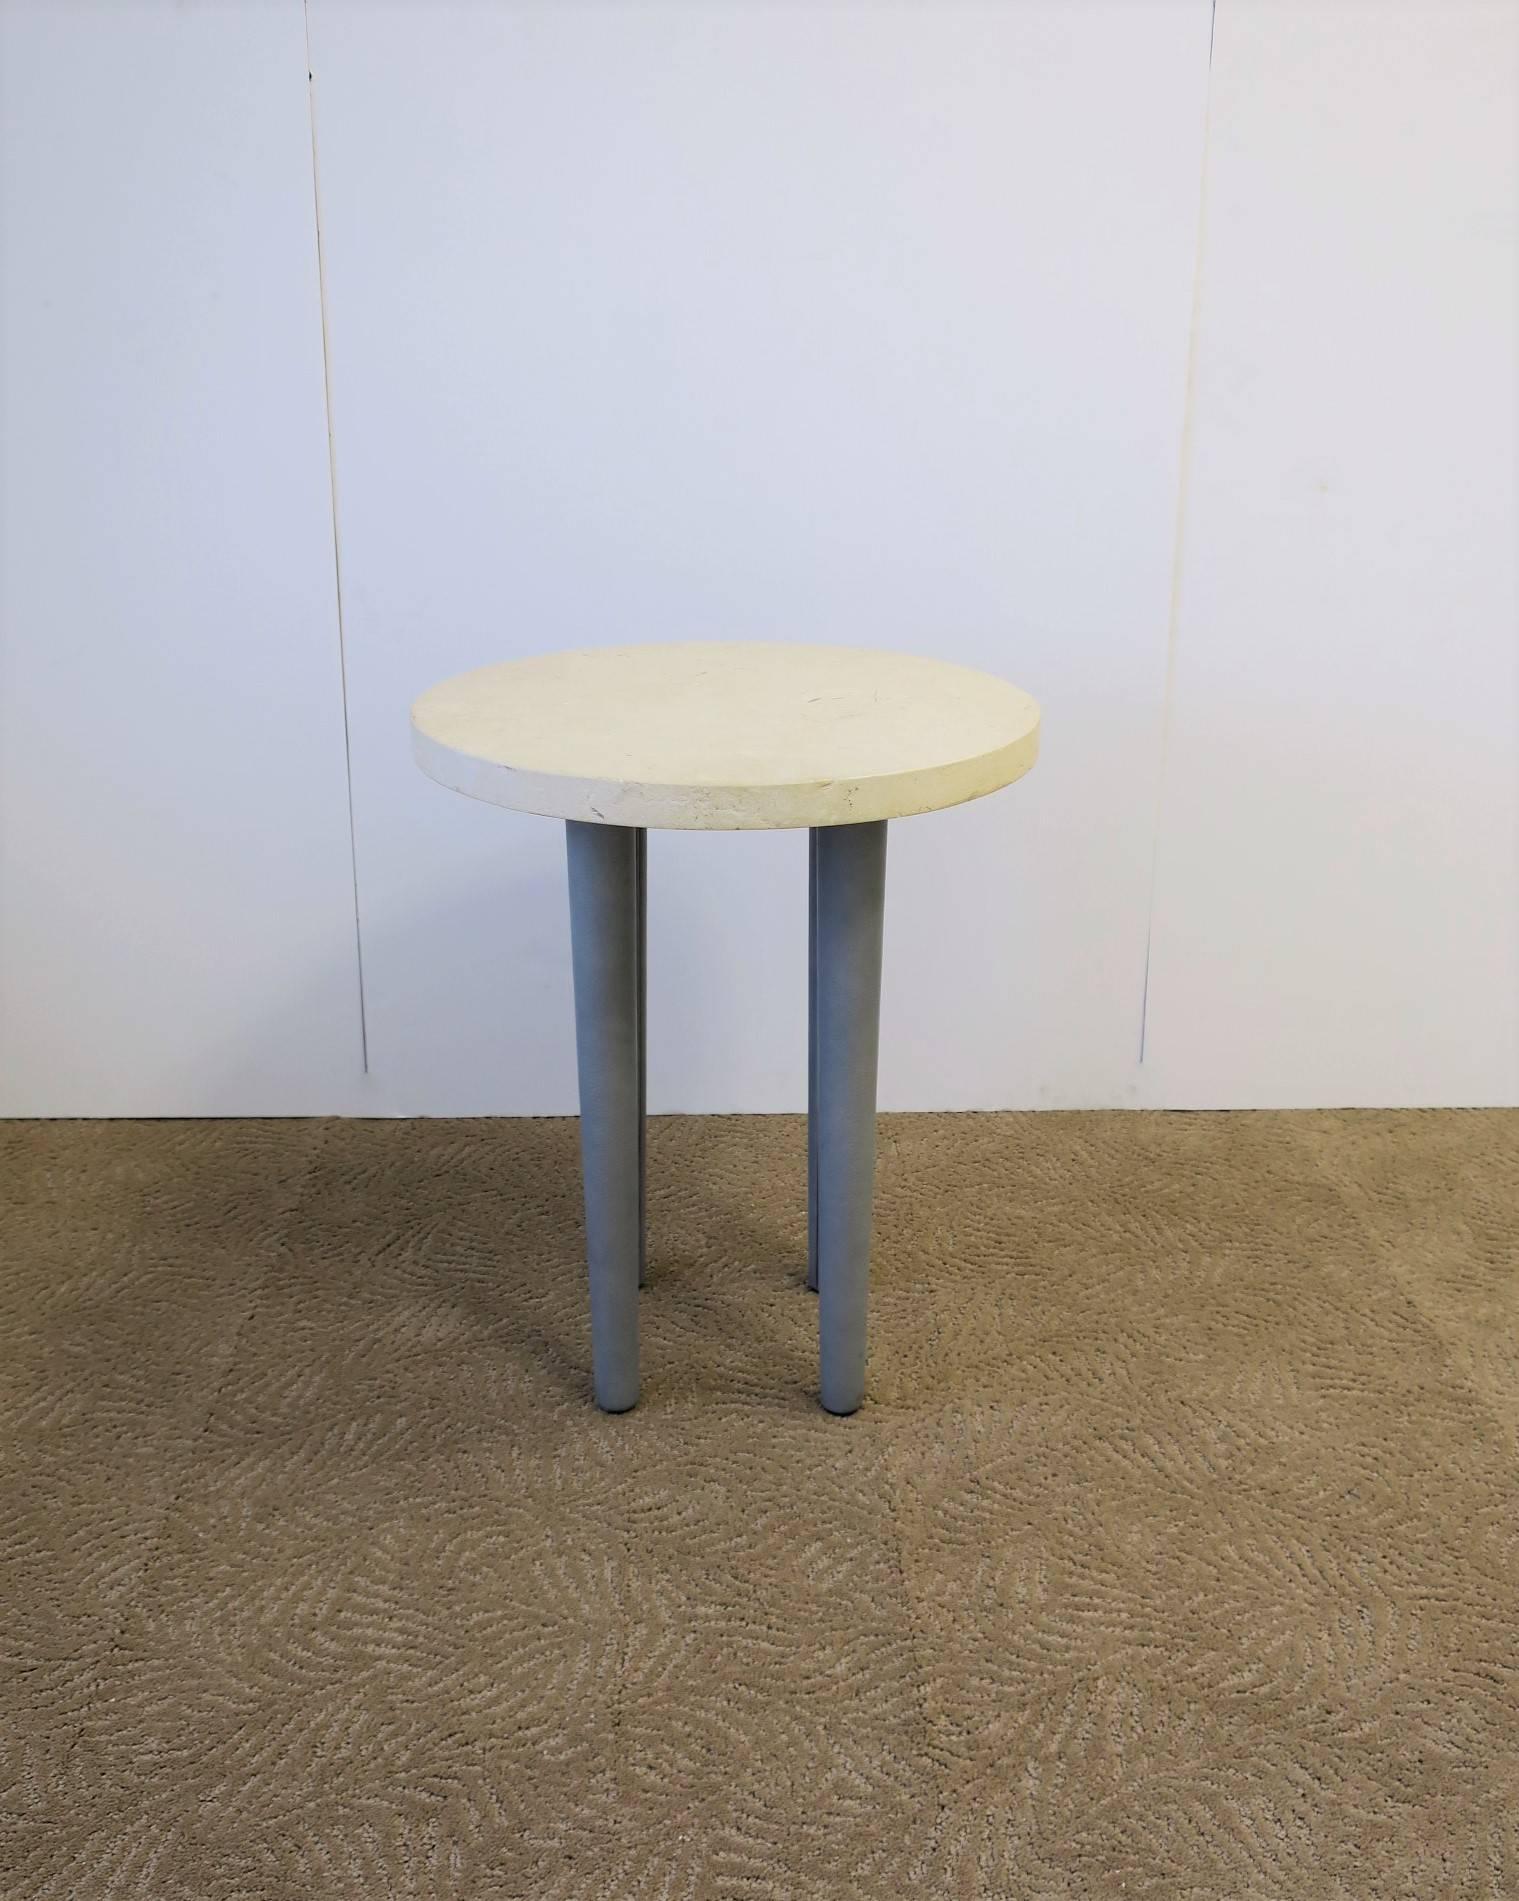 A substantial Post-Modern stone and leather round side or drinks table, circa Late-20th century. The sand/beige round stone (similar to travertine marble) top is substantial at 1.38 inches thick and is slightly textured as stone would be. Base is